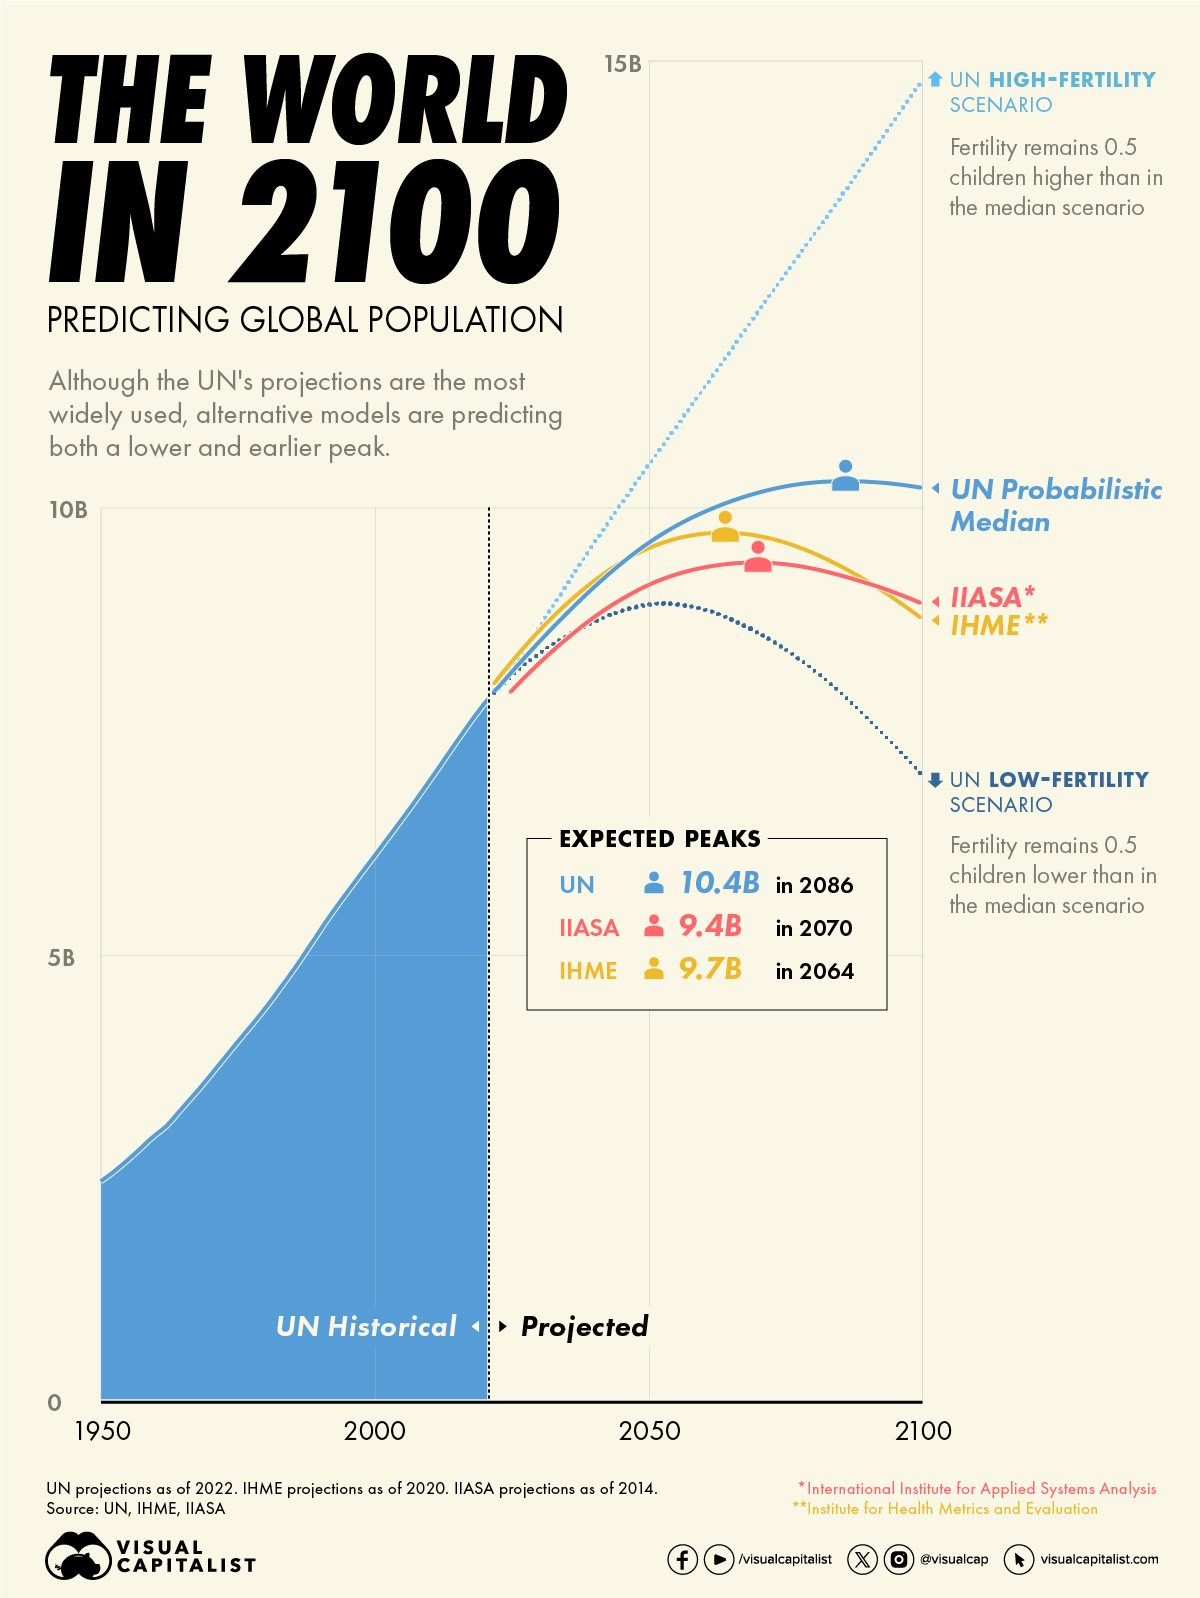 Comparing Global Population Projections to 2100